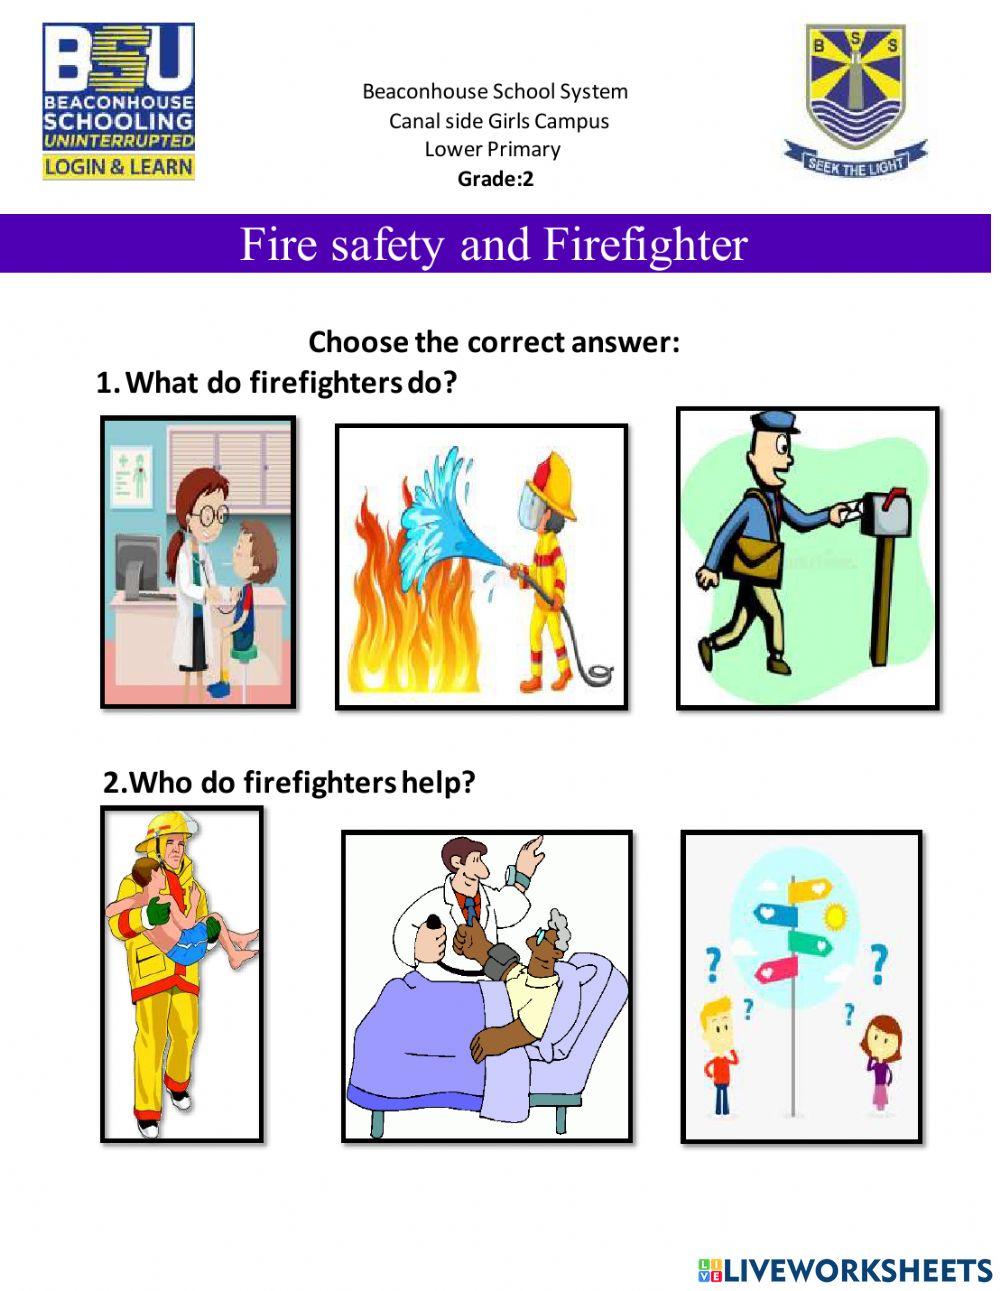 Fire safety and fire fighter